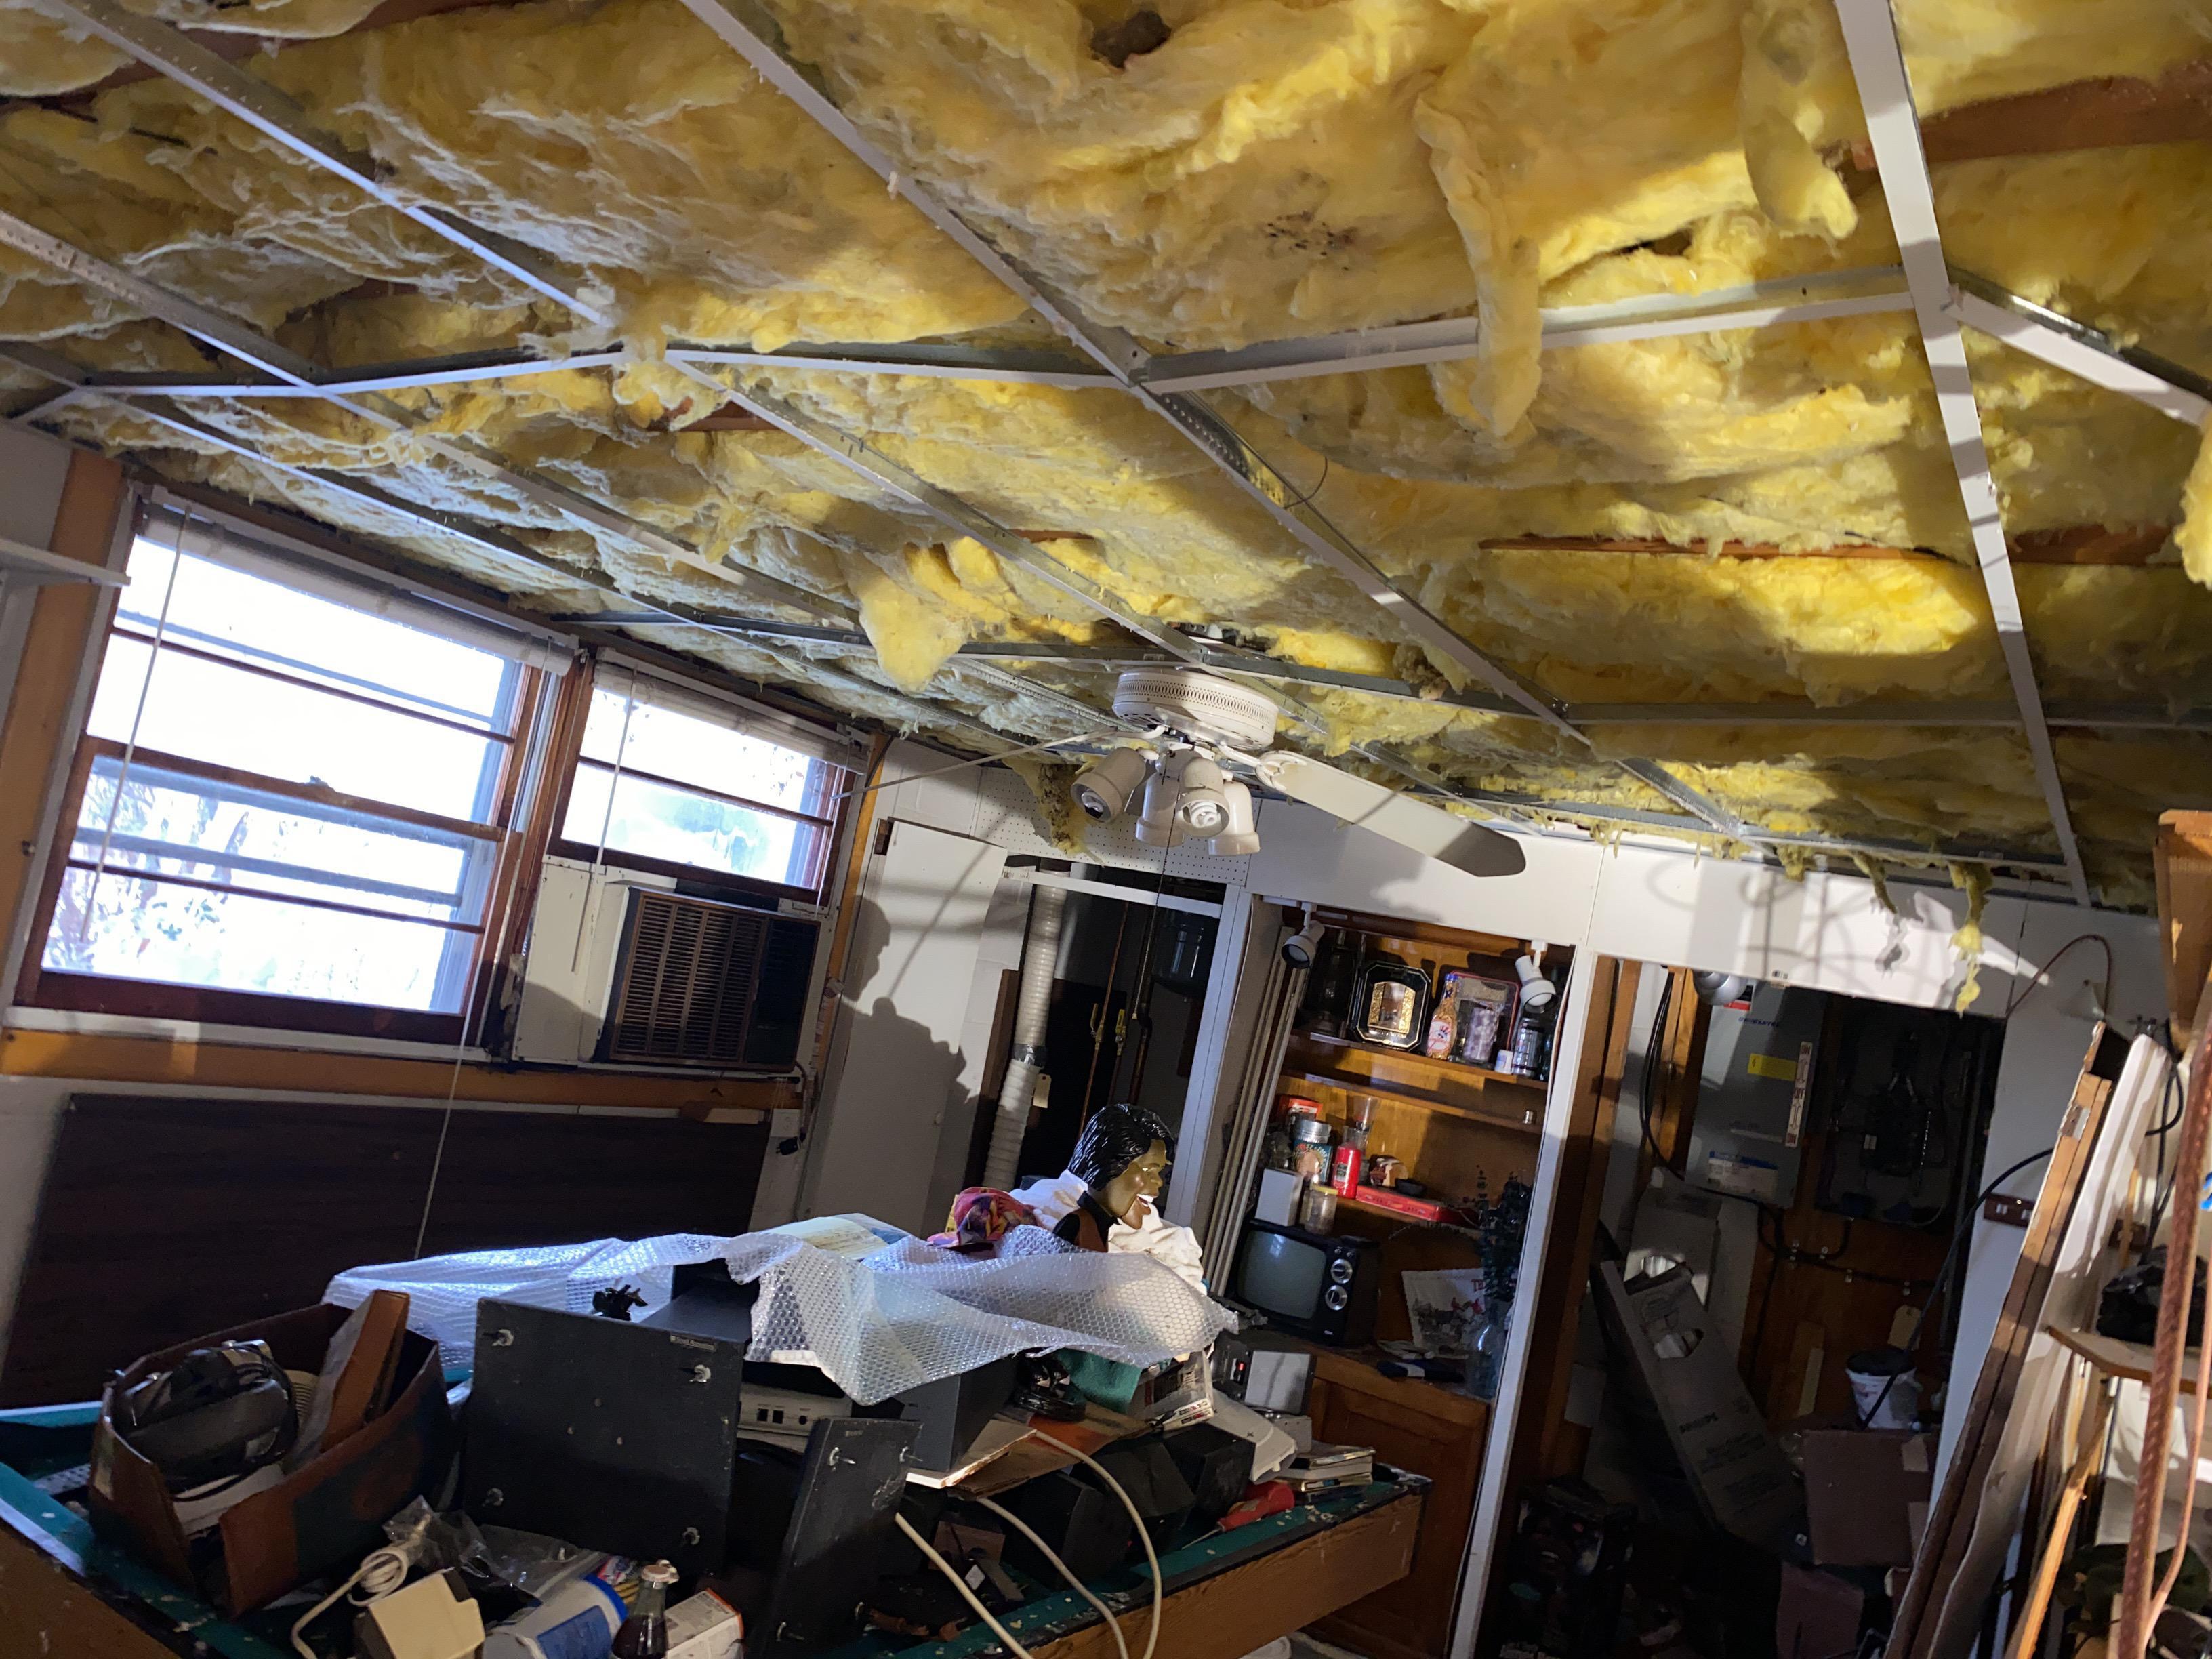 Ceiling tiles removed